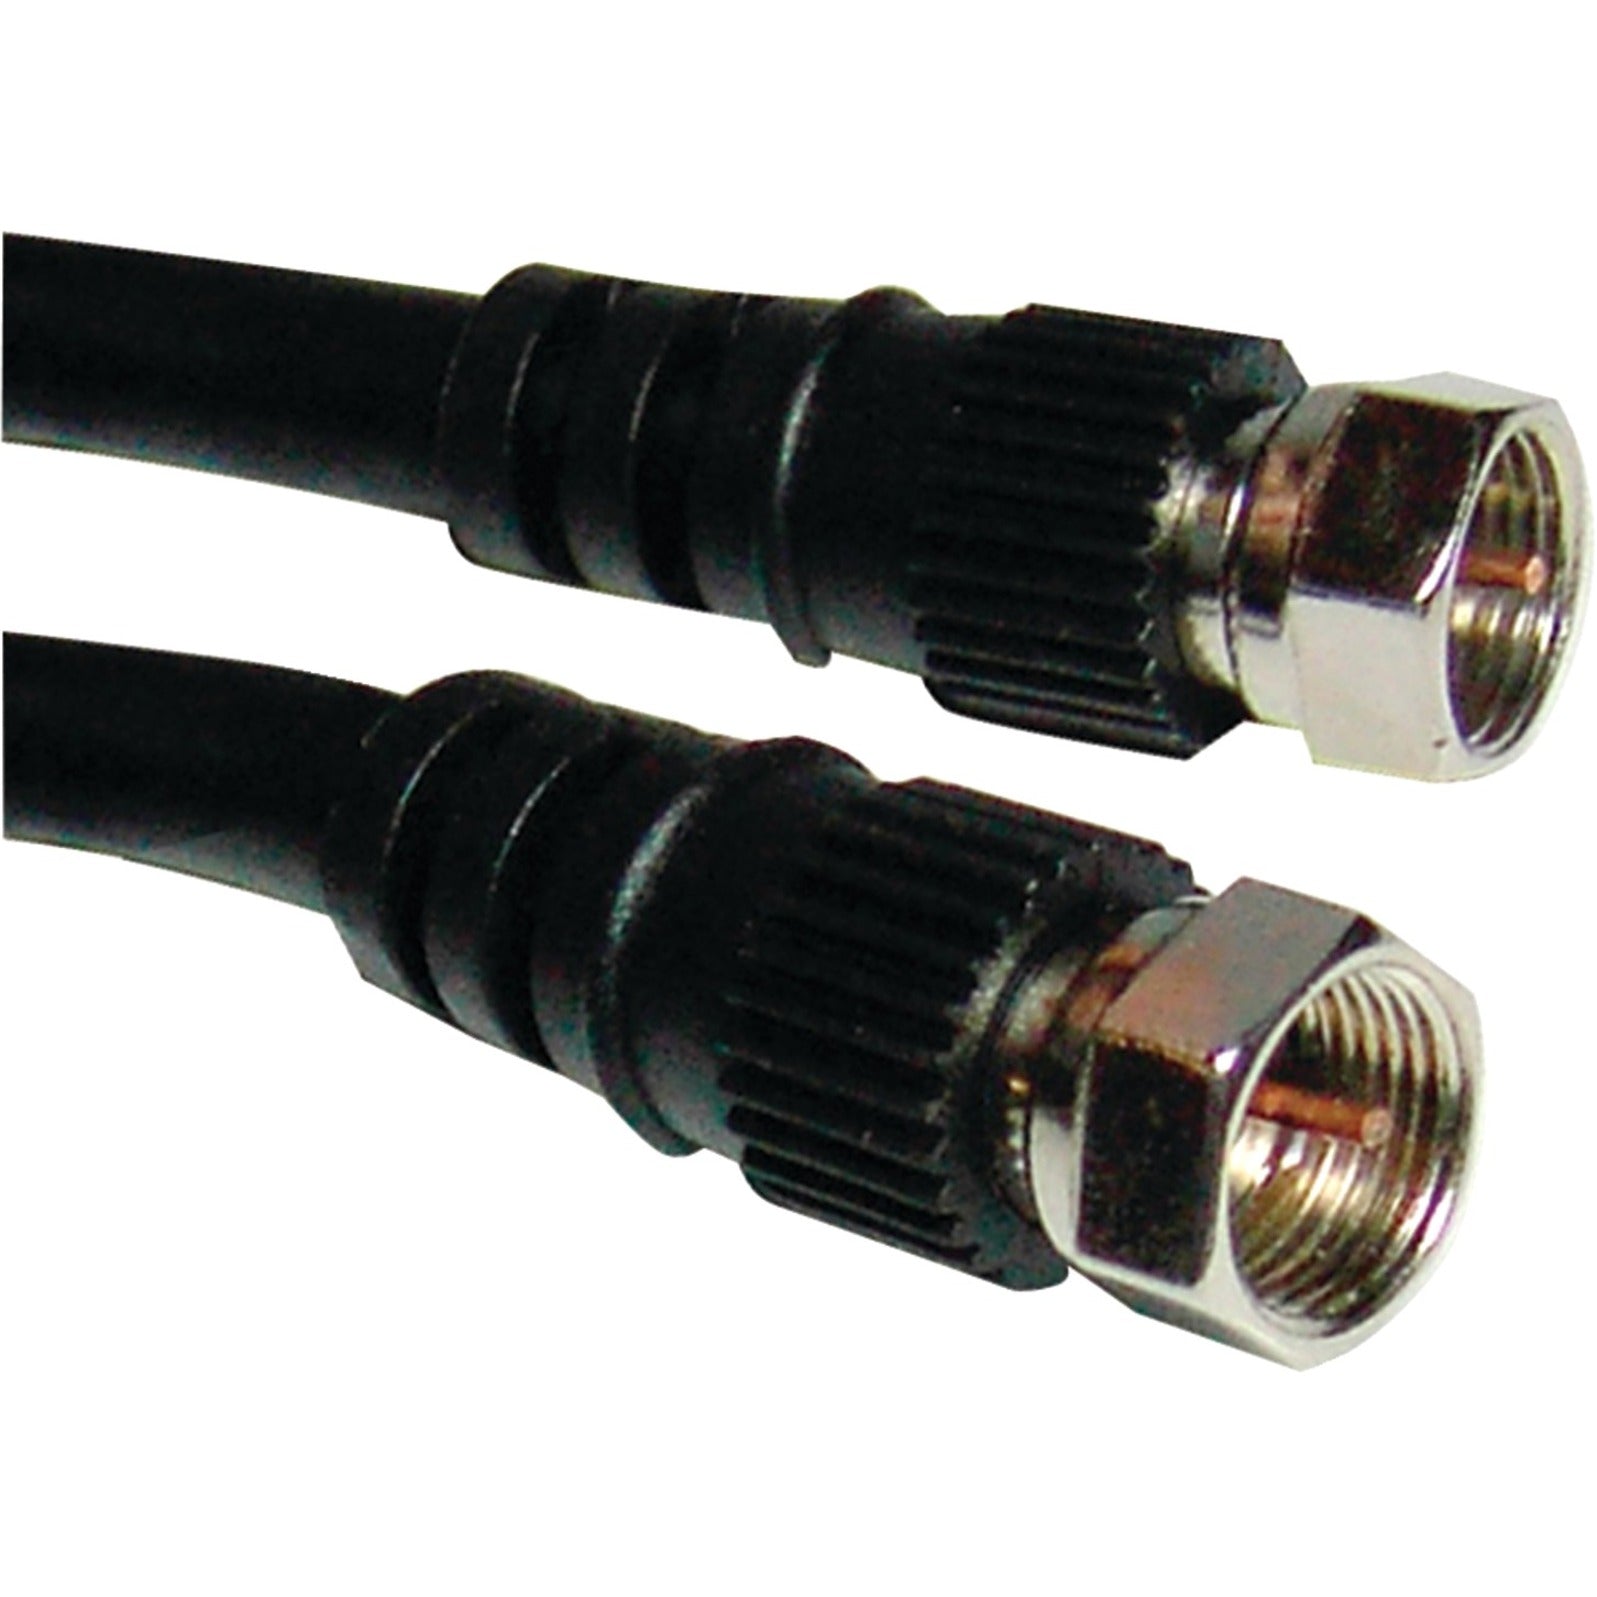 Petra Coaxial Video Cable - High-Quality Molded 25 ft Black Cable [Discontinued]